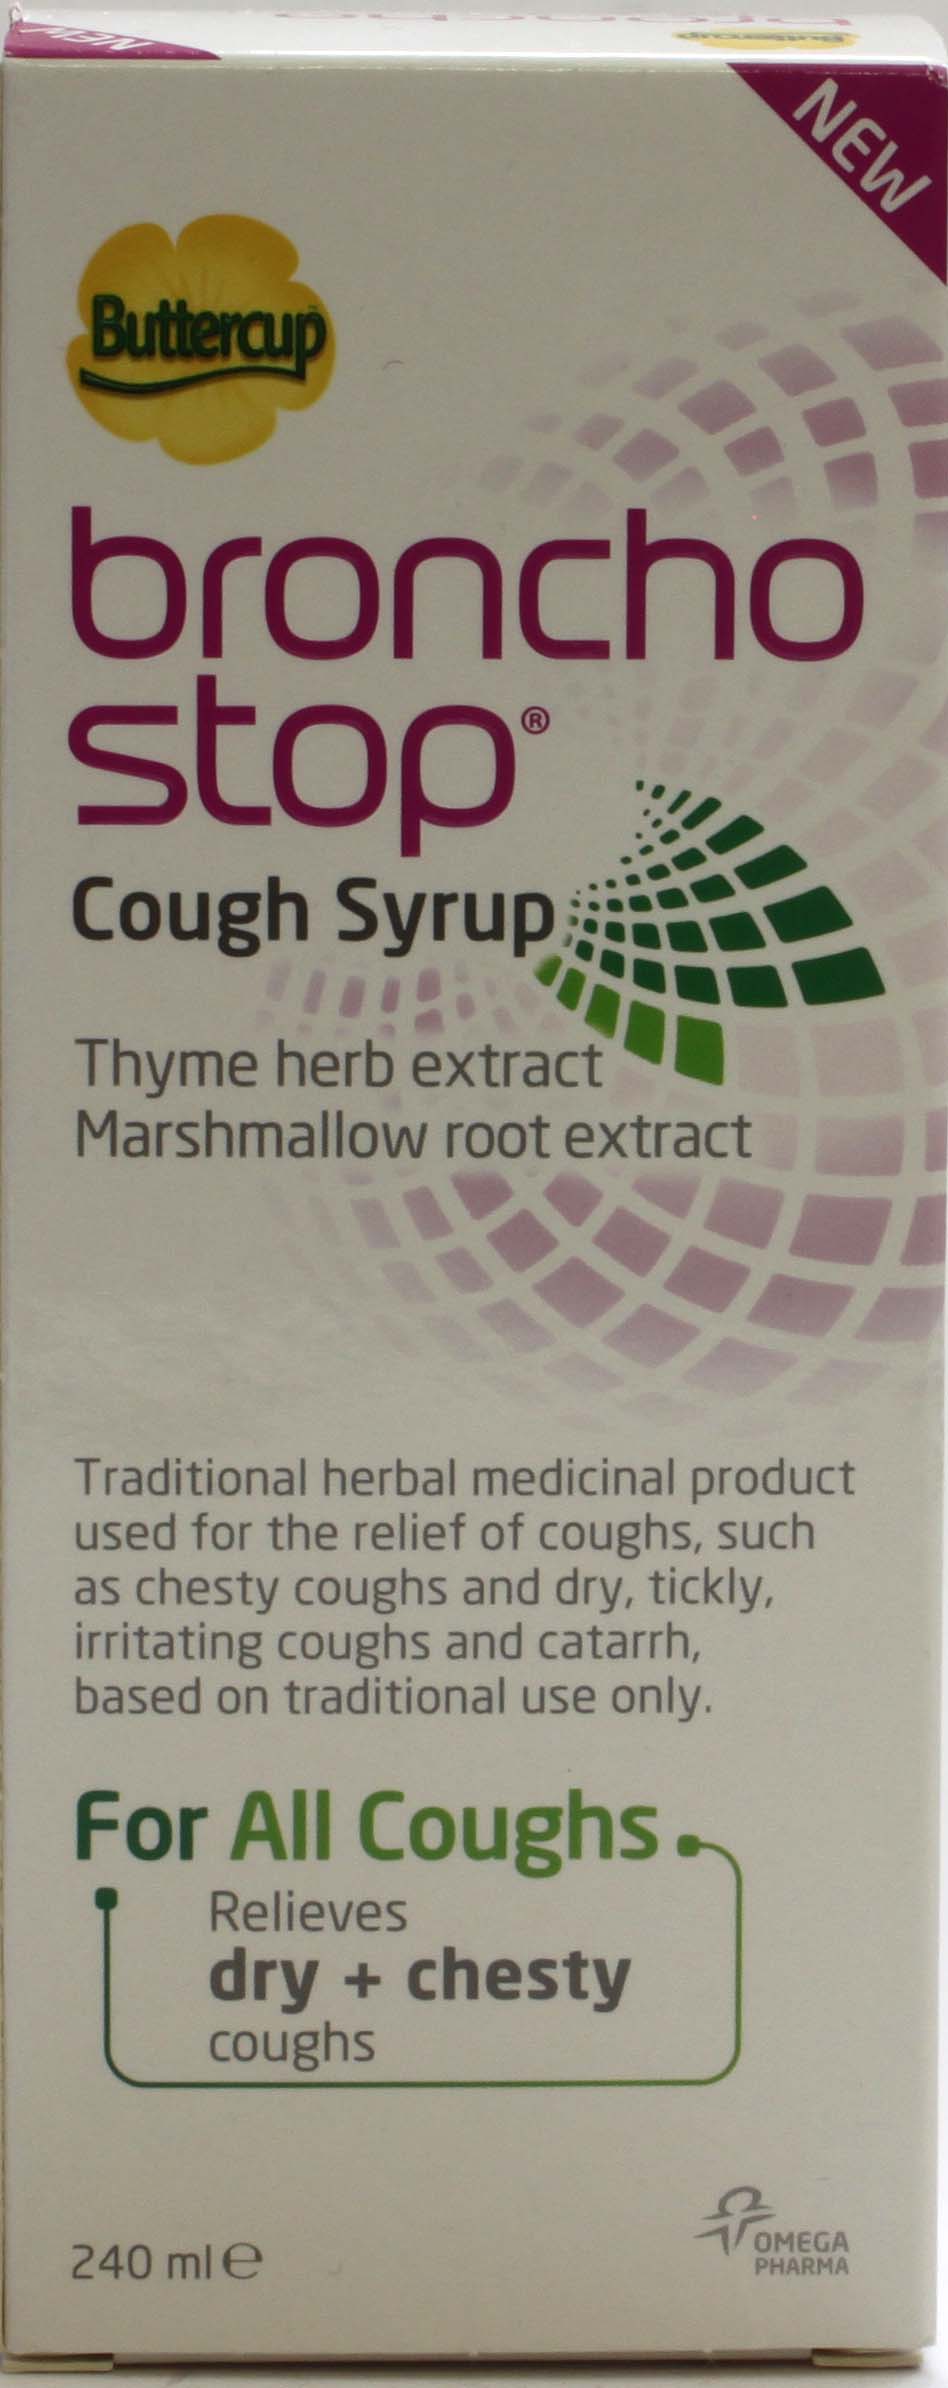 Buttercup Broncho Stop Cough Syrup 240ml